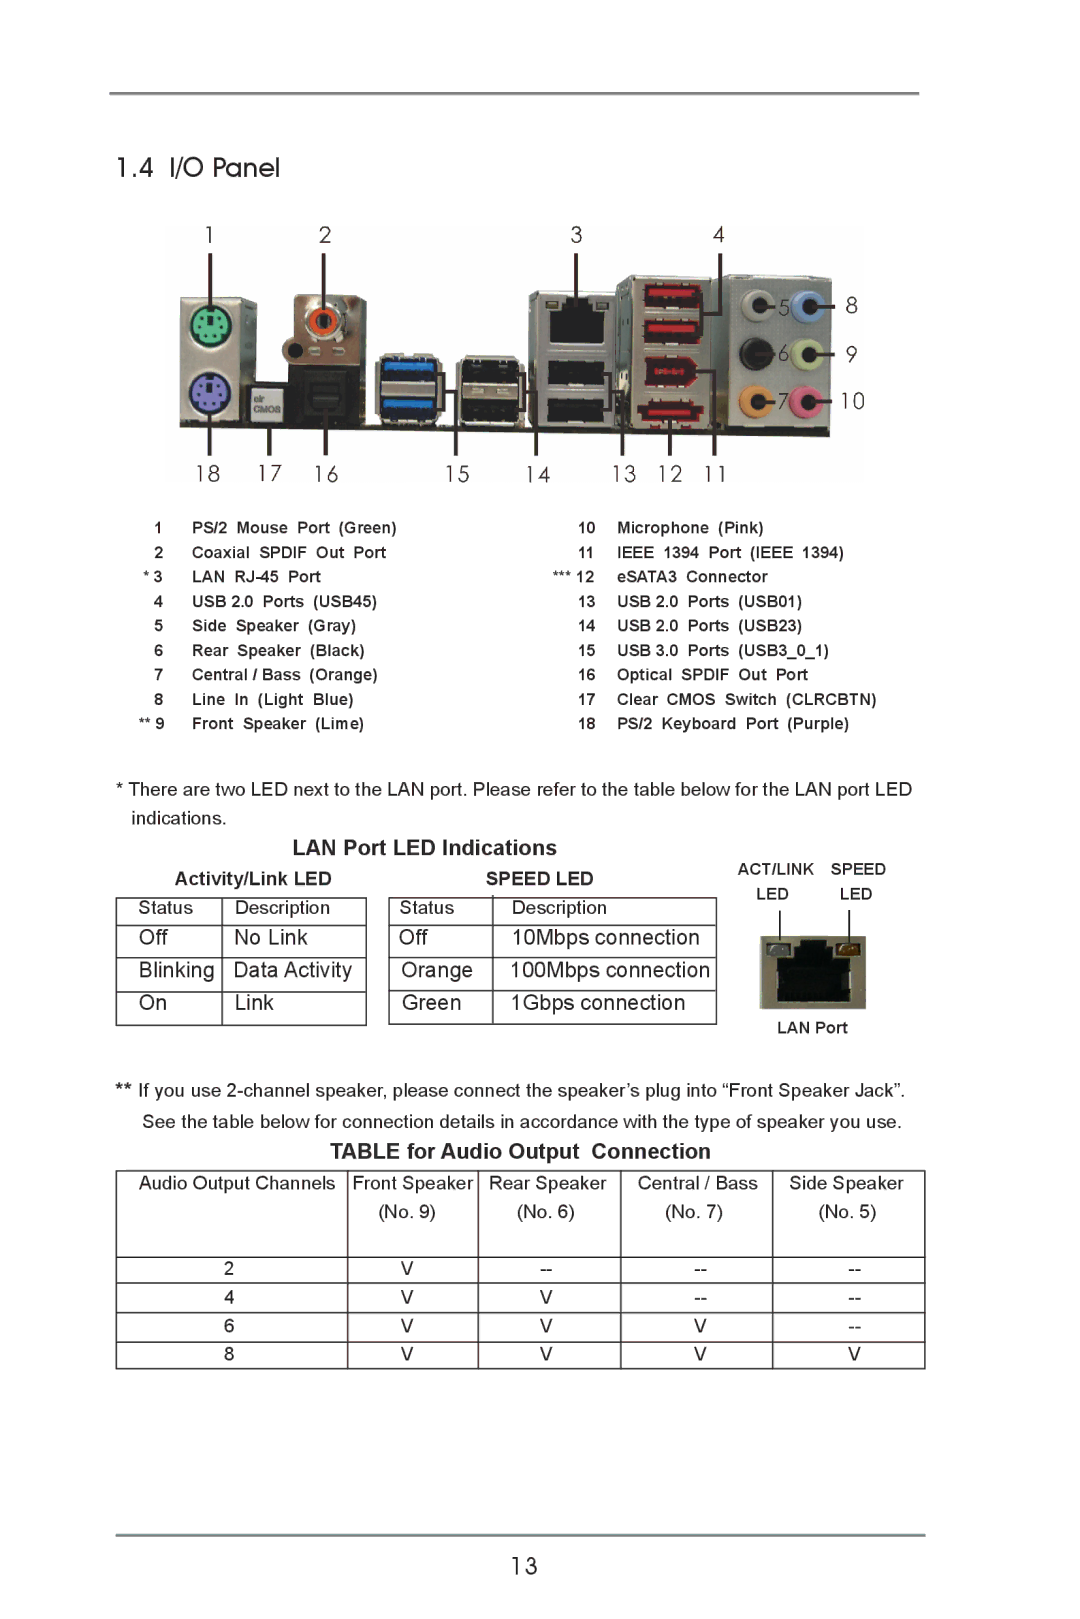 ASRock X79 Extreme4-M manual I/O Panel, LAN Port LED Indications, Off No Link Blinking, Table for Audio Output Connection 